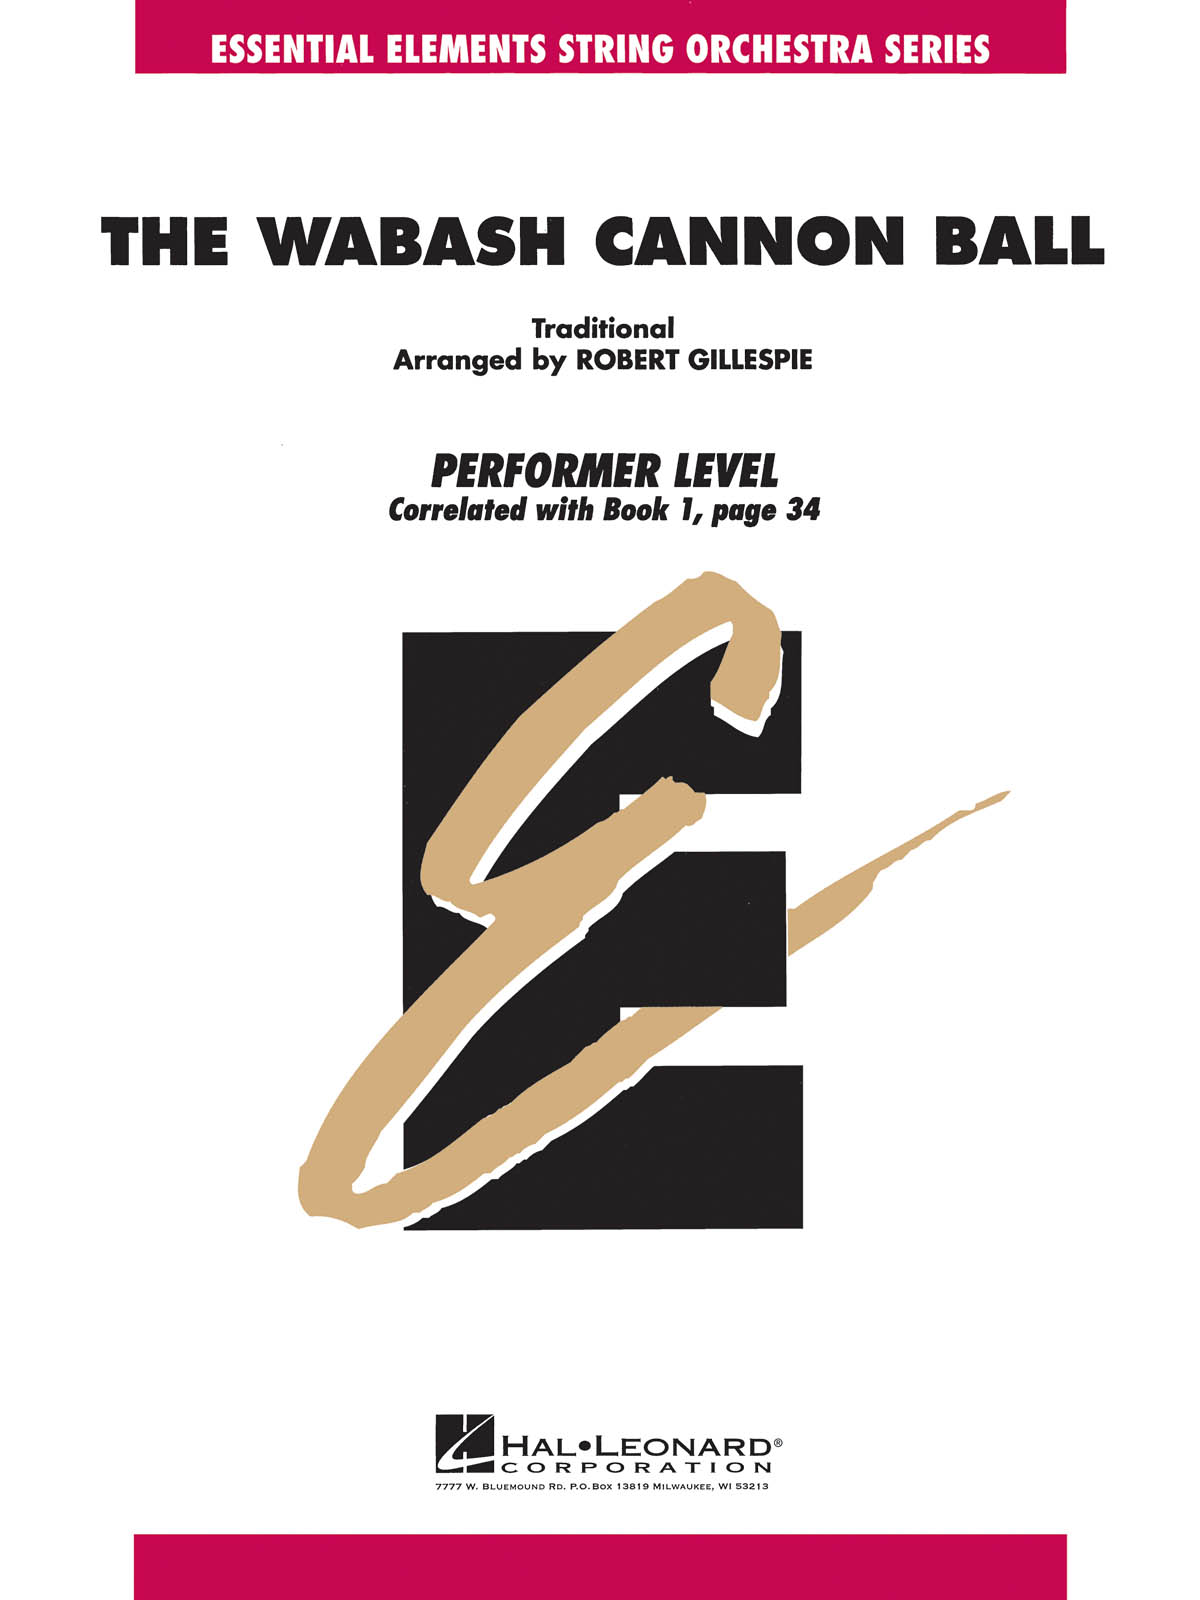 The Wabash Cannon Ball: Orchestra: Score & Parts